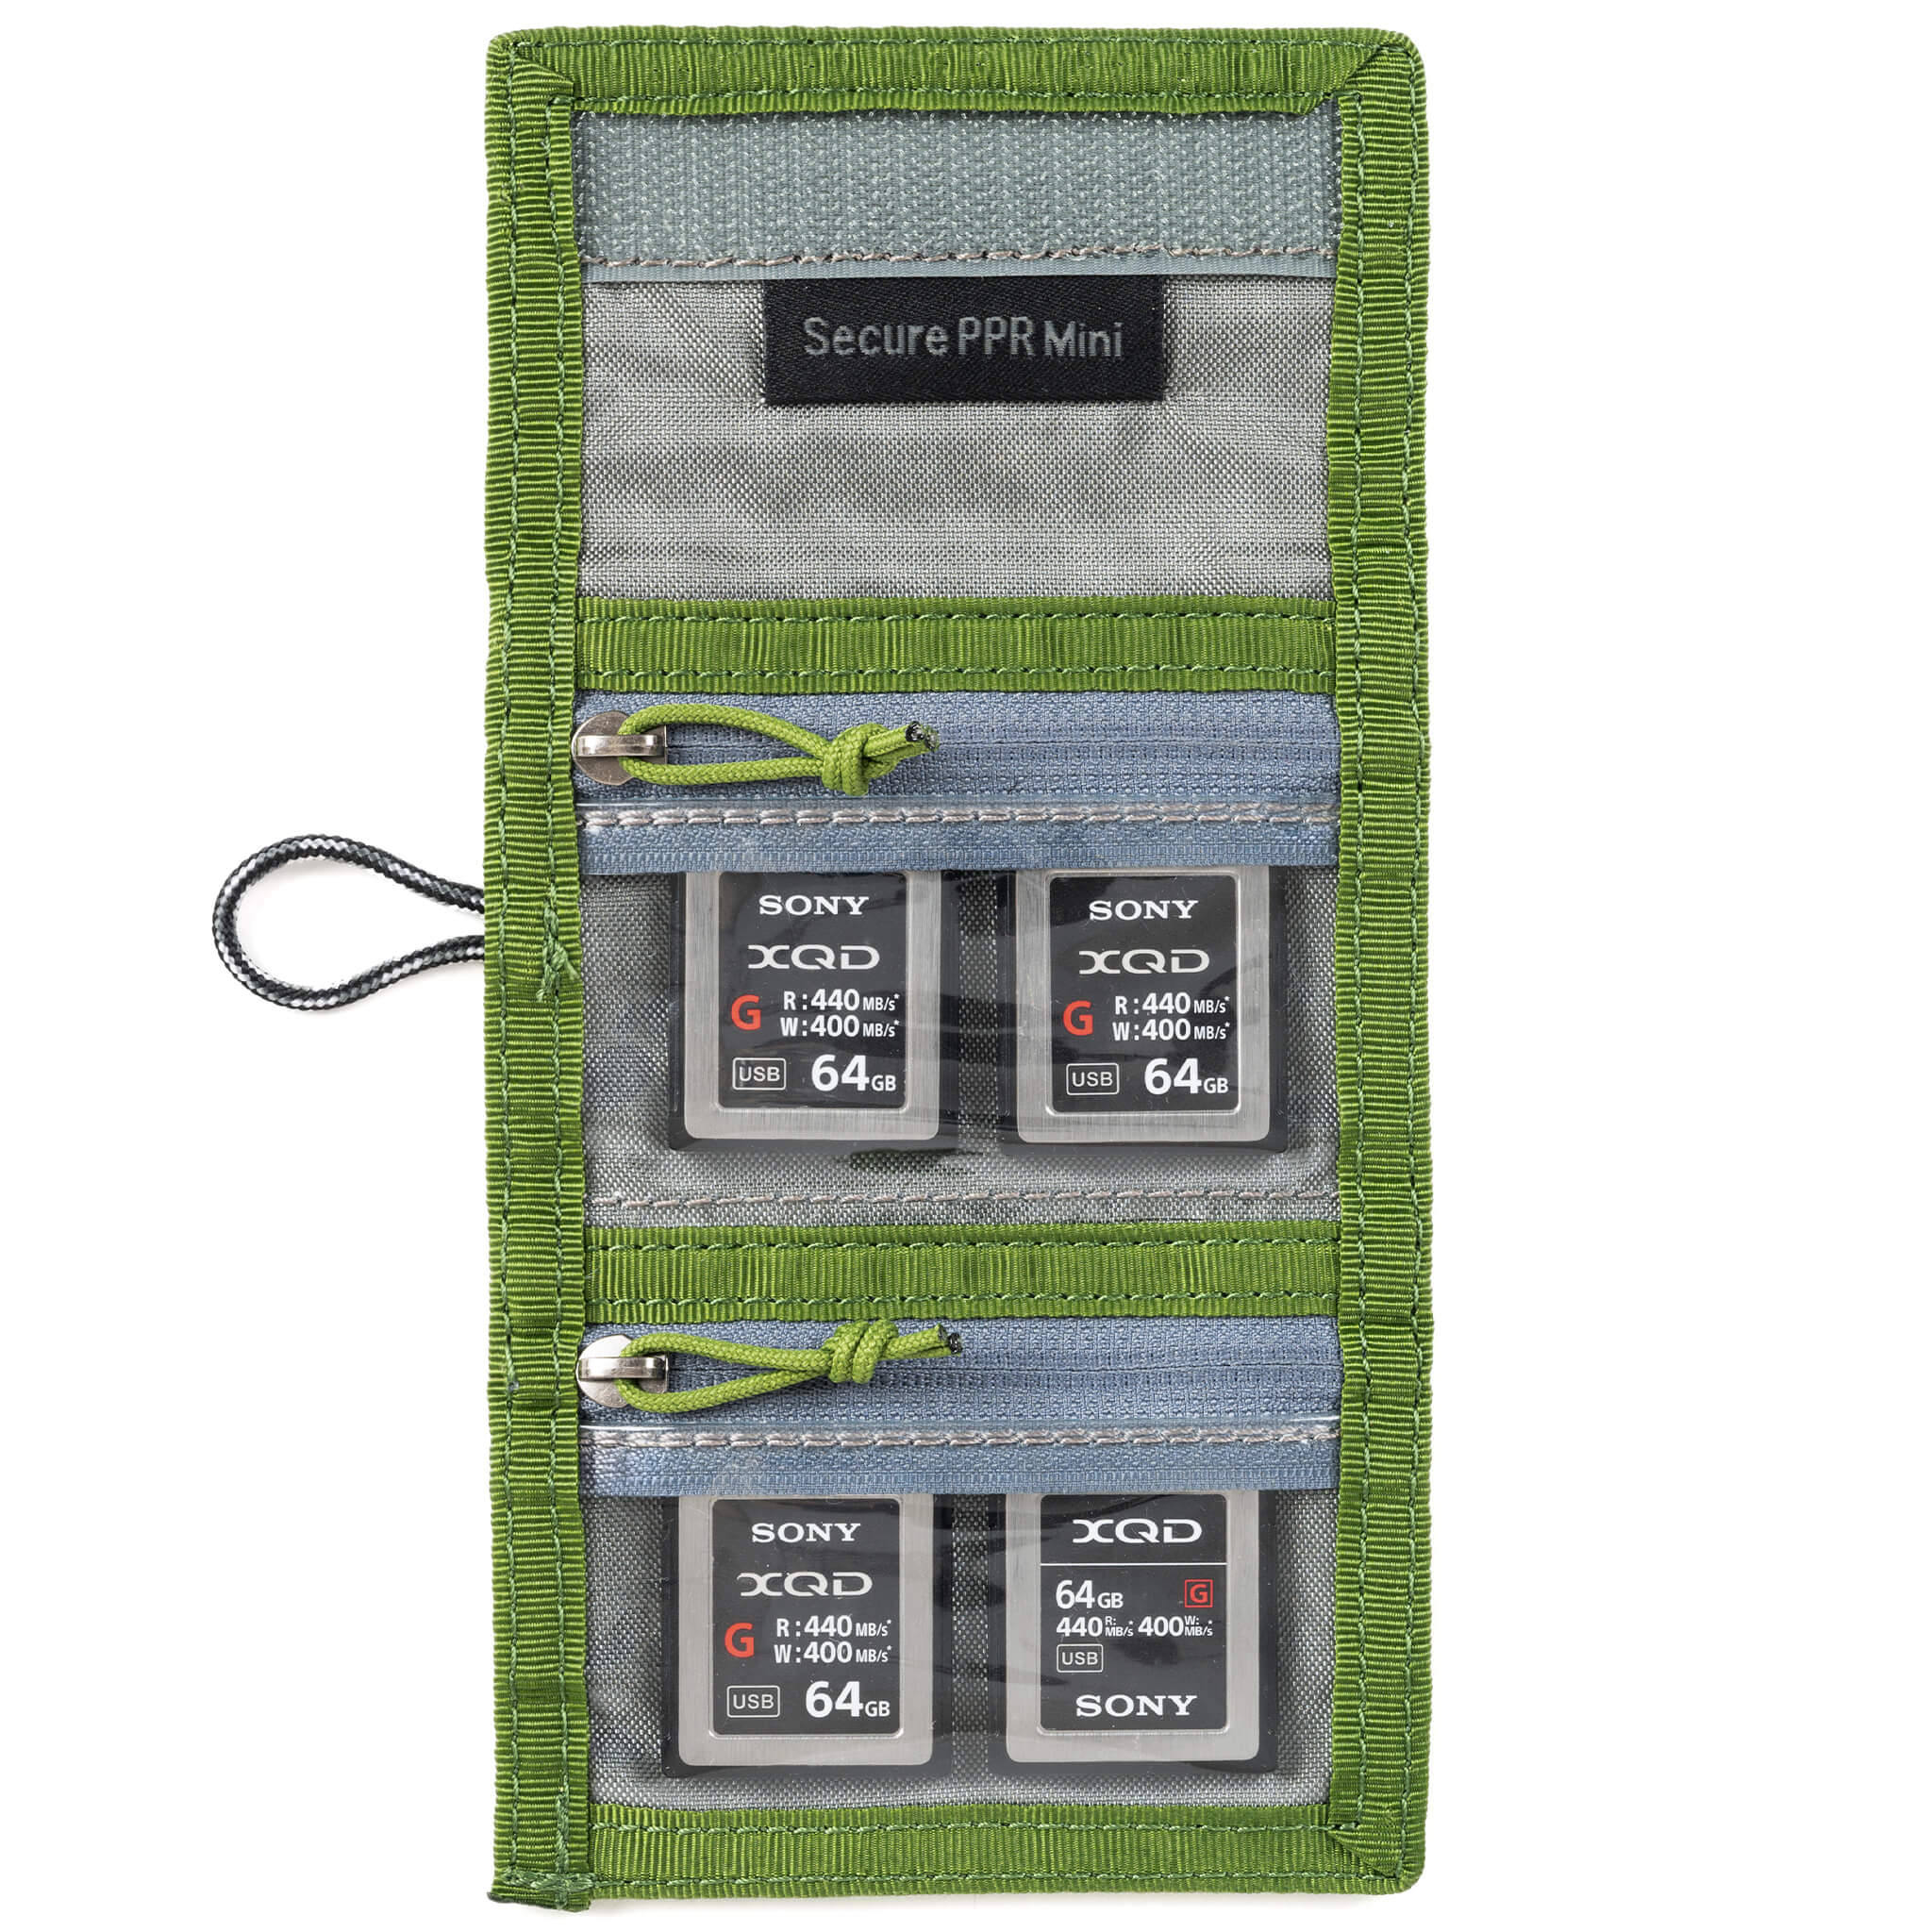 Clear zippered card slots to see contents; Flip cards around when used / full